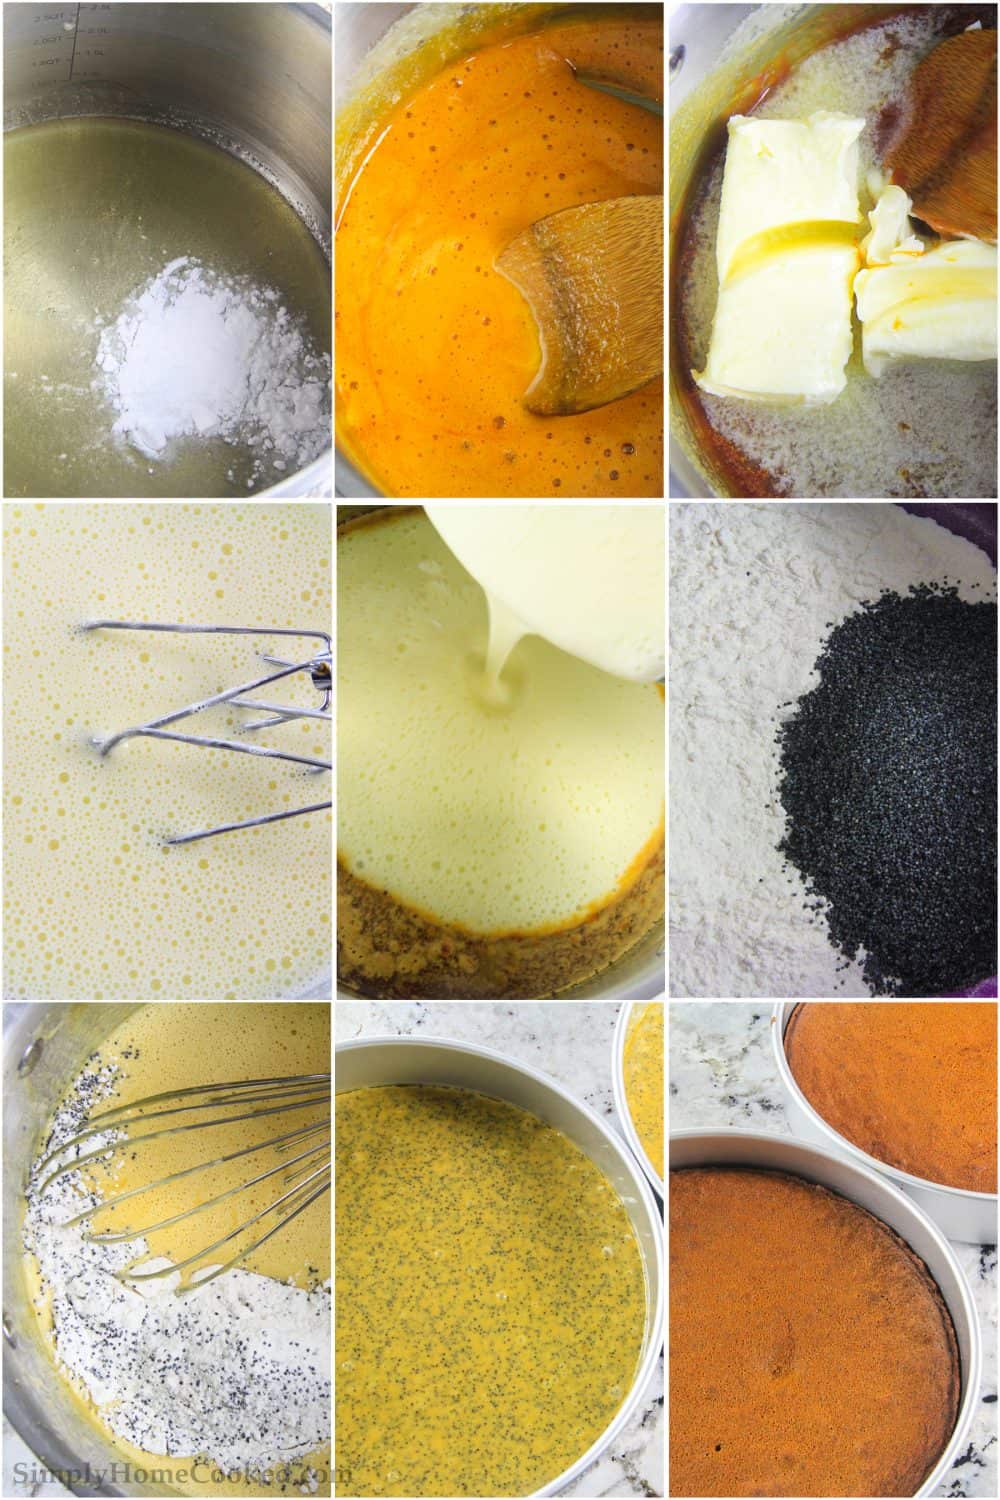 Nine tiled images of honey and baking soda being mixed with butter, sugar, poppy seeds, flour, and eggs, then poured into two bake pans.